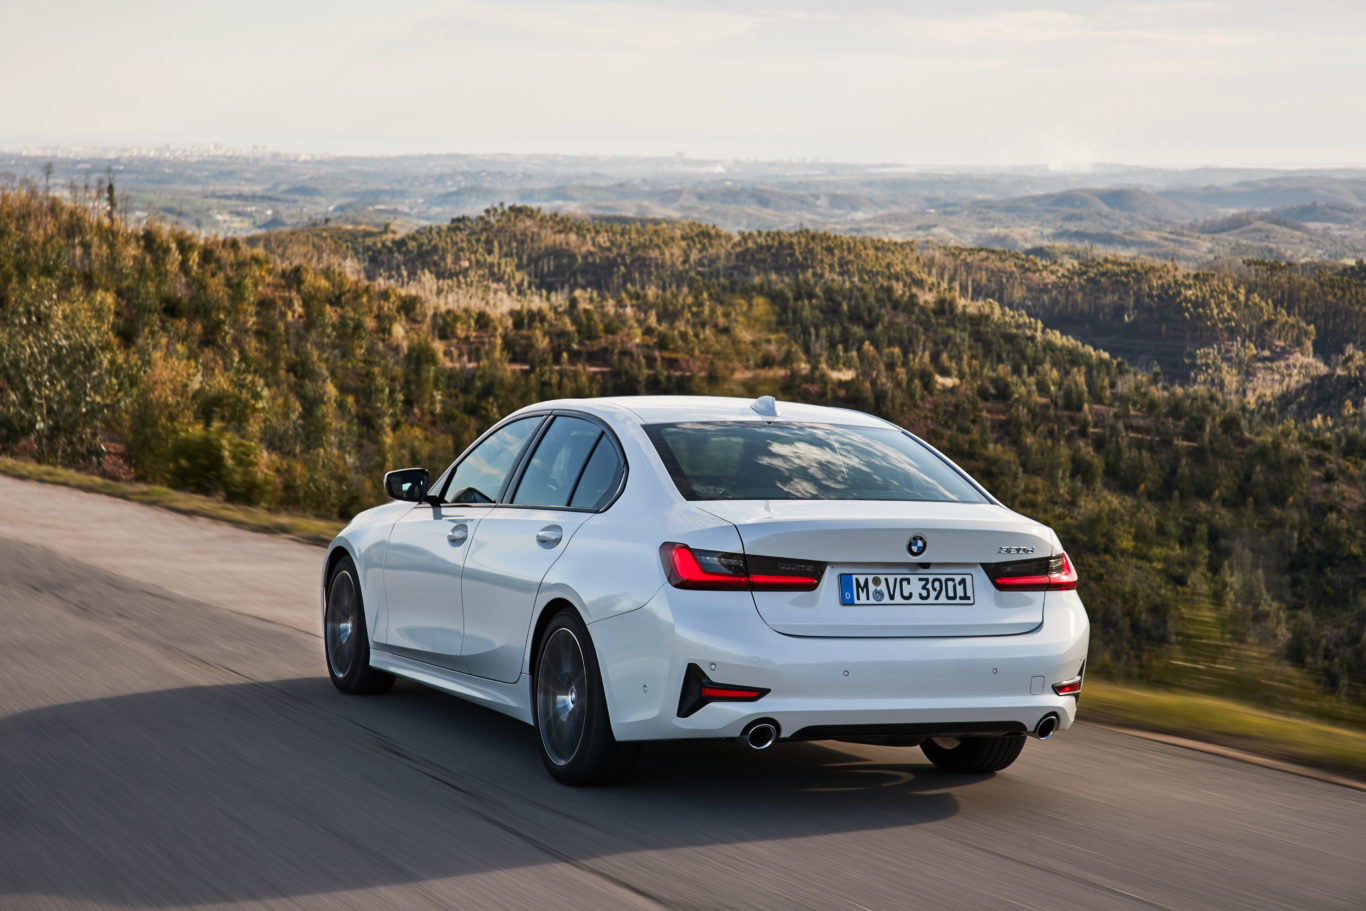 The rear of the 3 Series is sharper than before EMBARGO 11/12/2018 11:01 GMT